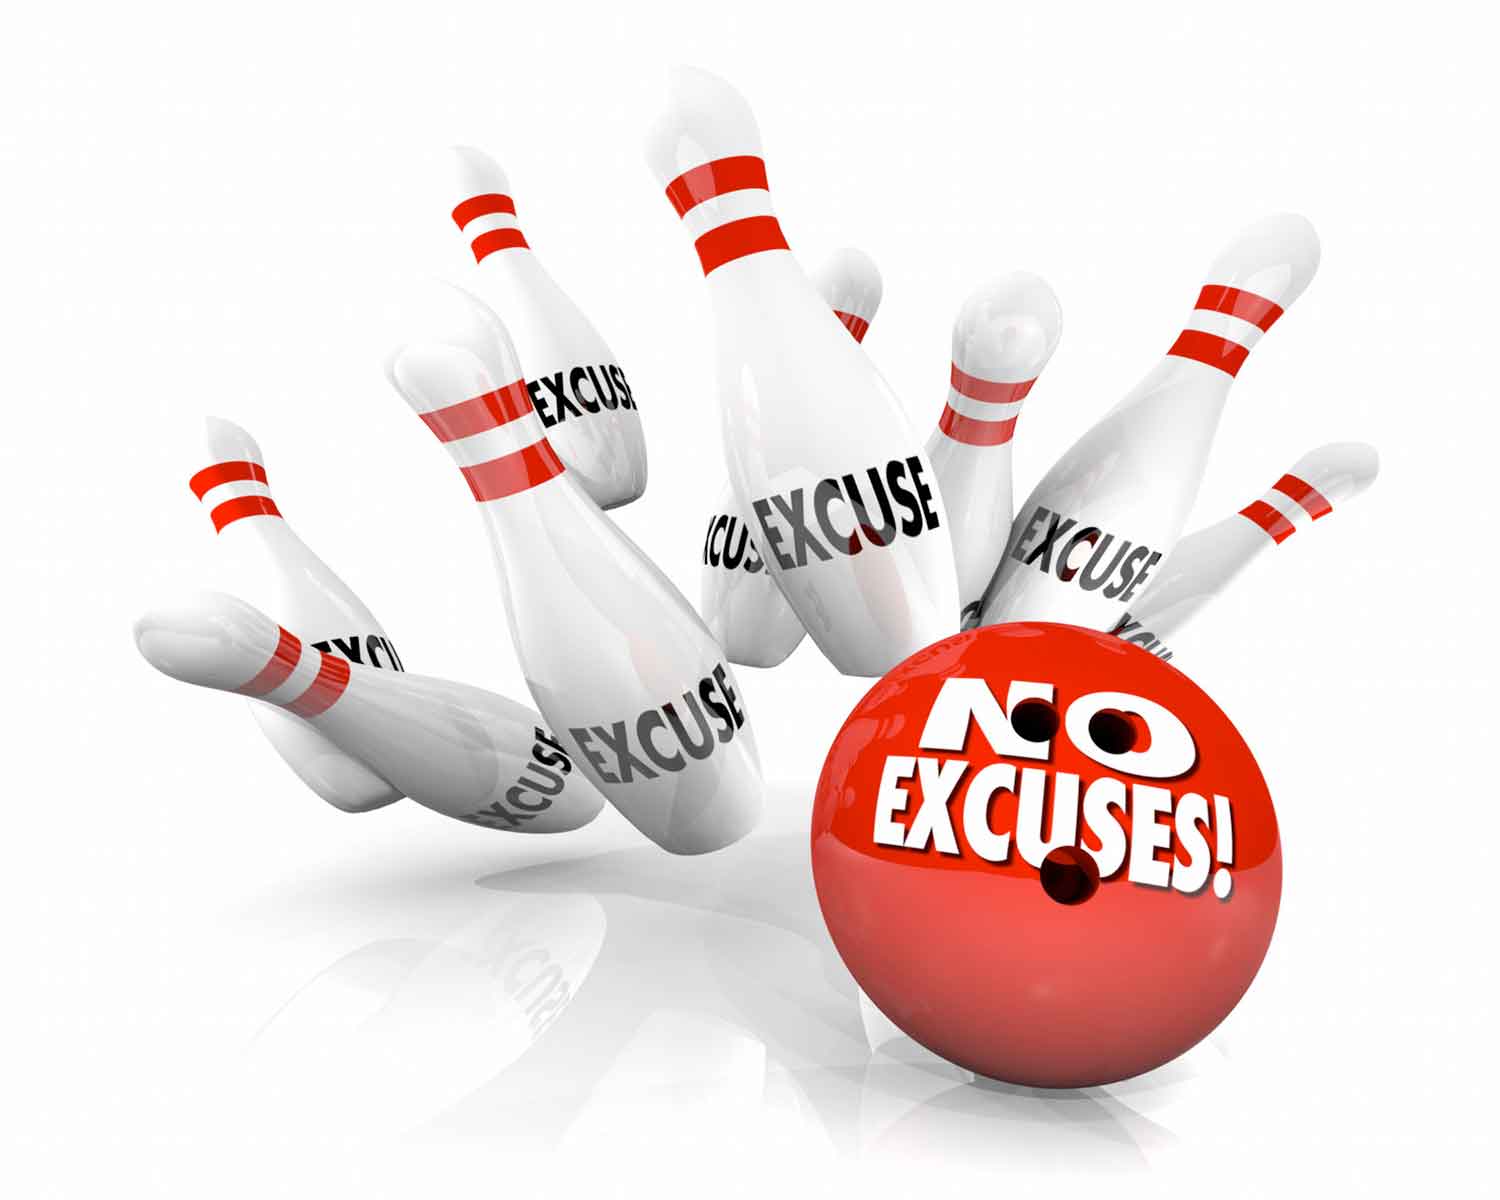 Owners make excuses are Accountable Responsible